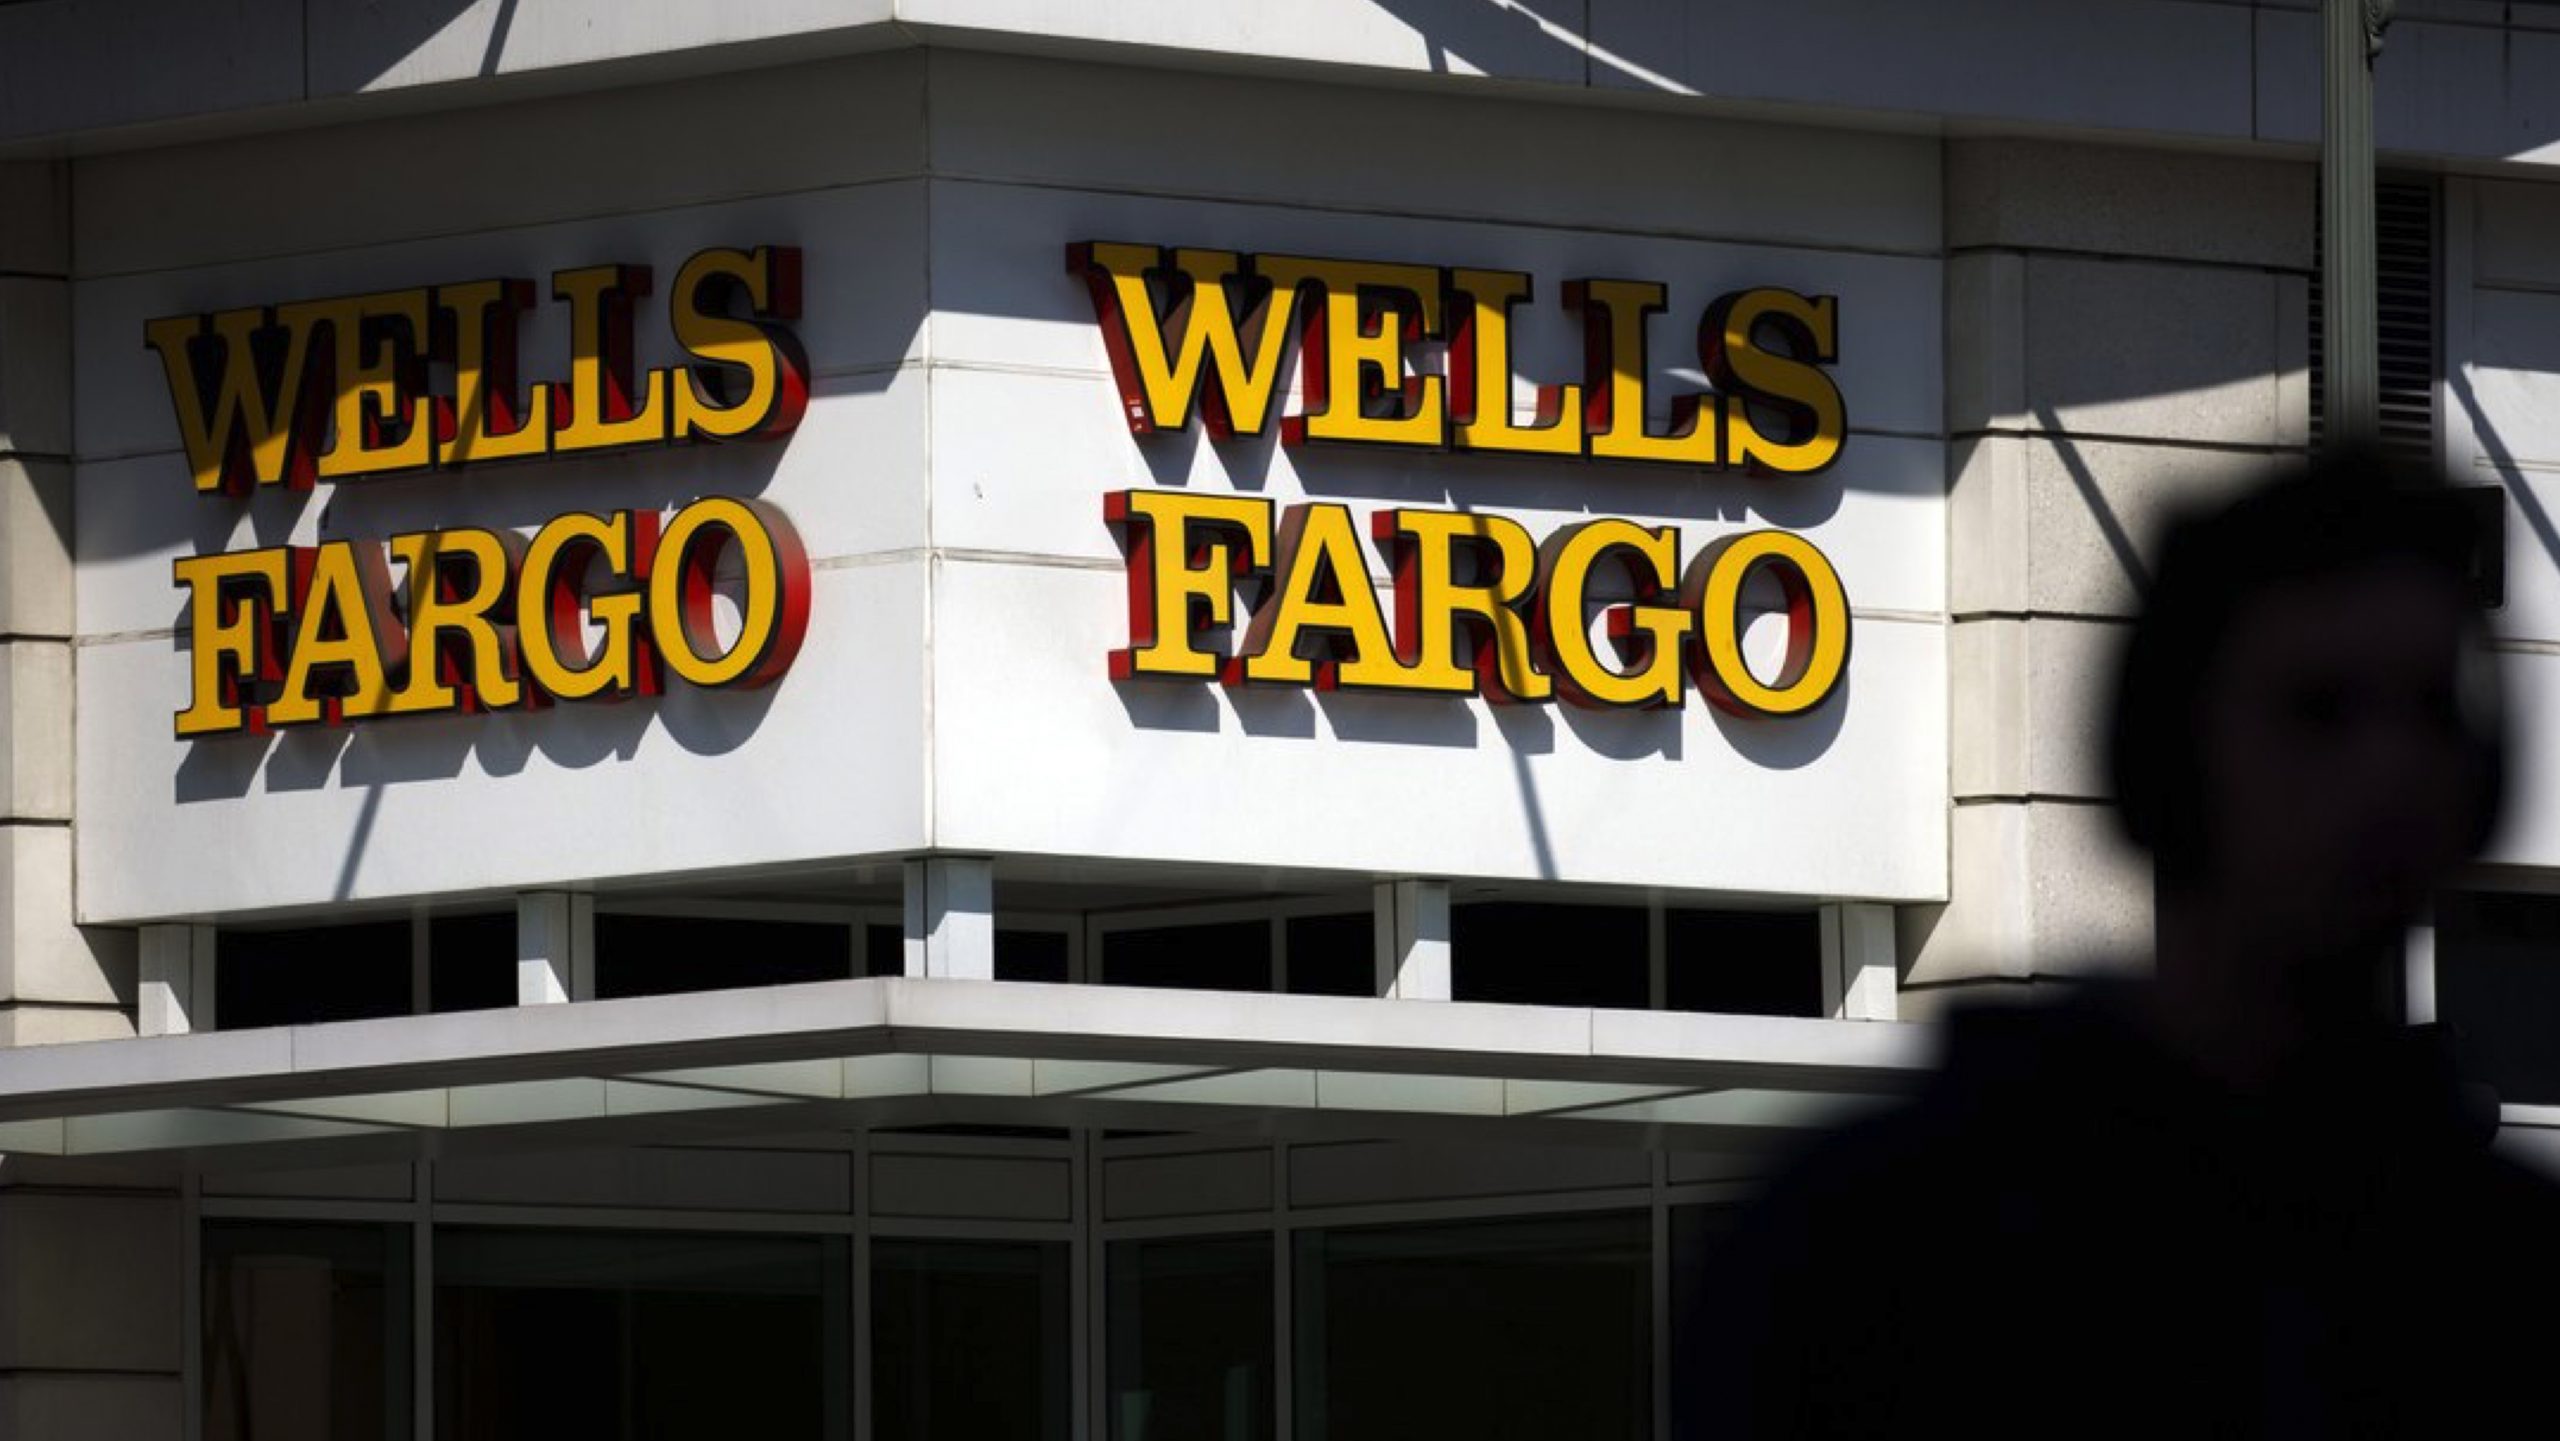 Wells Fargo has been in Washington, D.C., since 1914, with its first location on G Street NW. Since then, local investments in the District have included support for education, the arts and neighborhood revitalization, among other community needs.